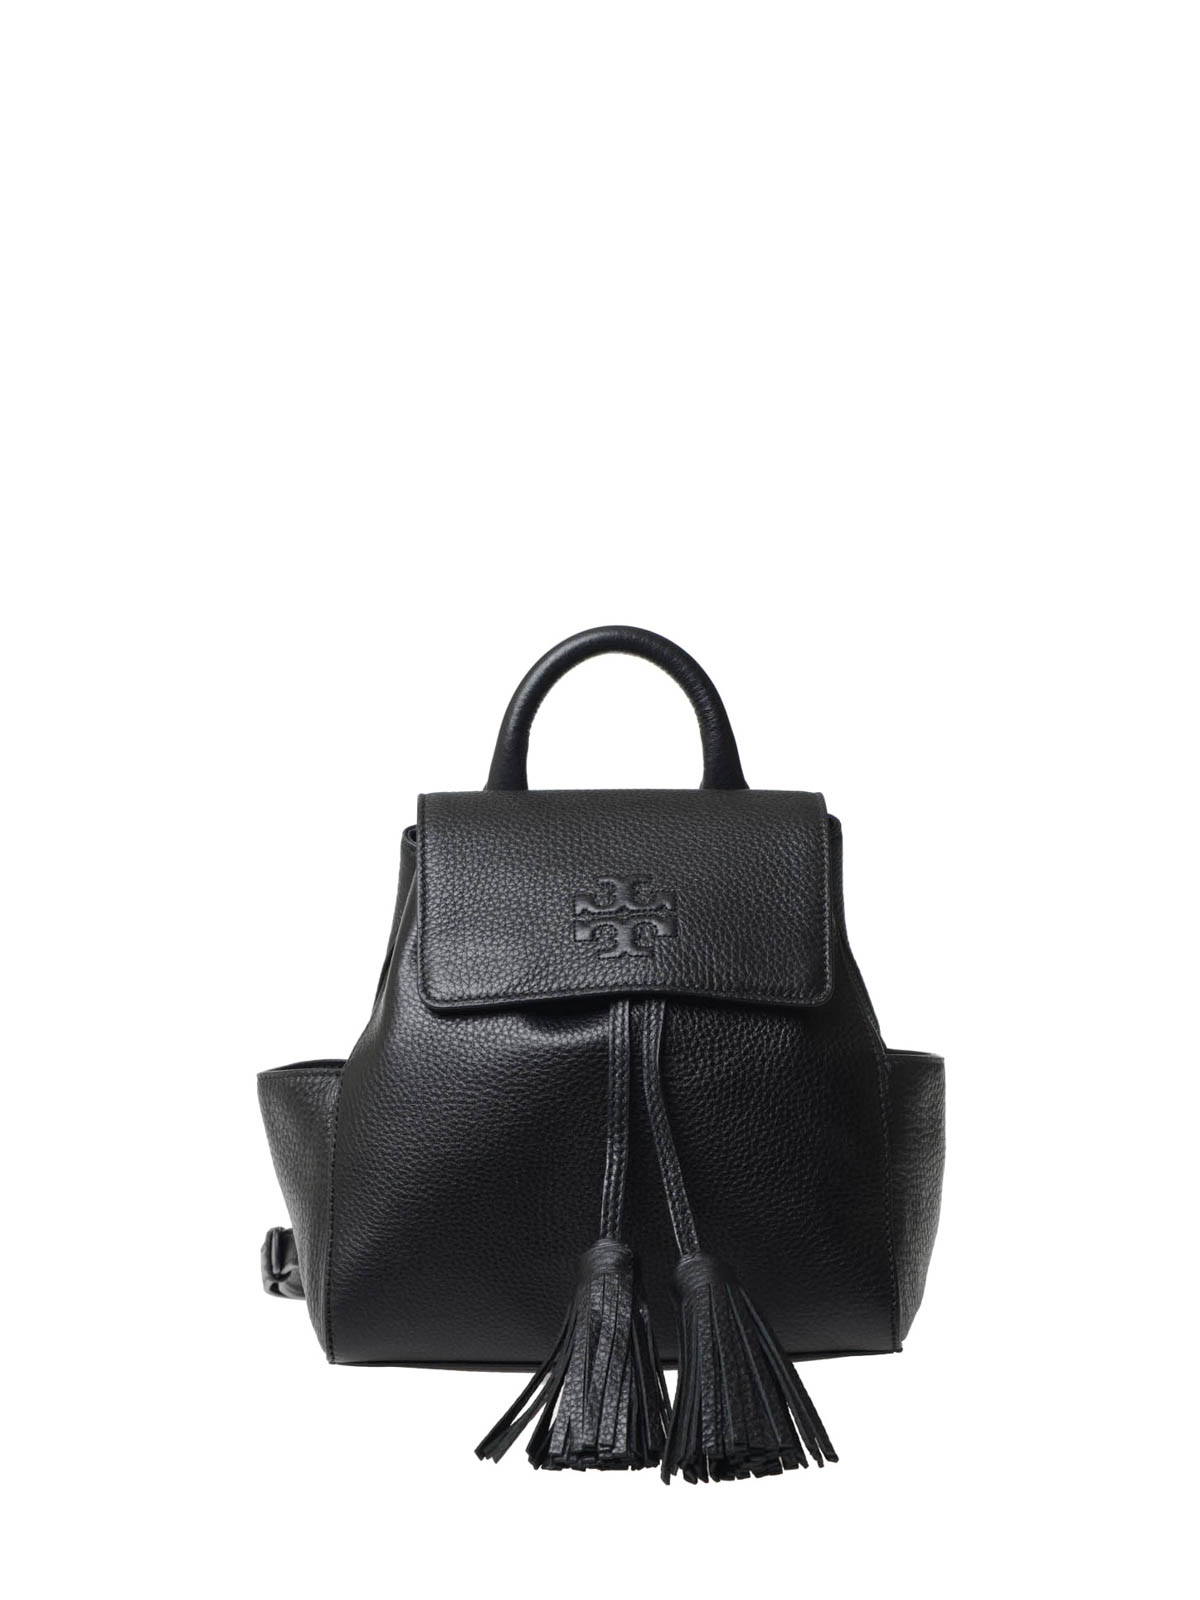 Backpacks Tory Burch - Thea backpack - 11169719001 | Shop online at iKRIX